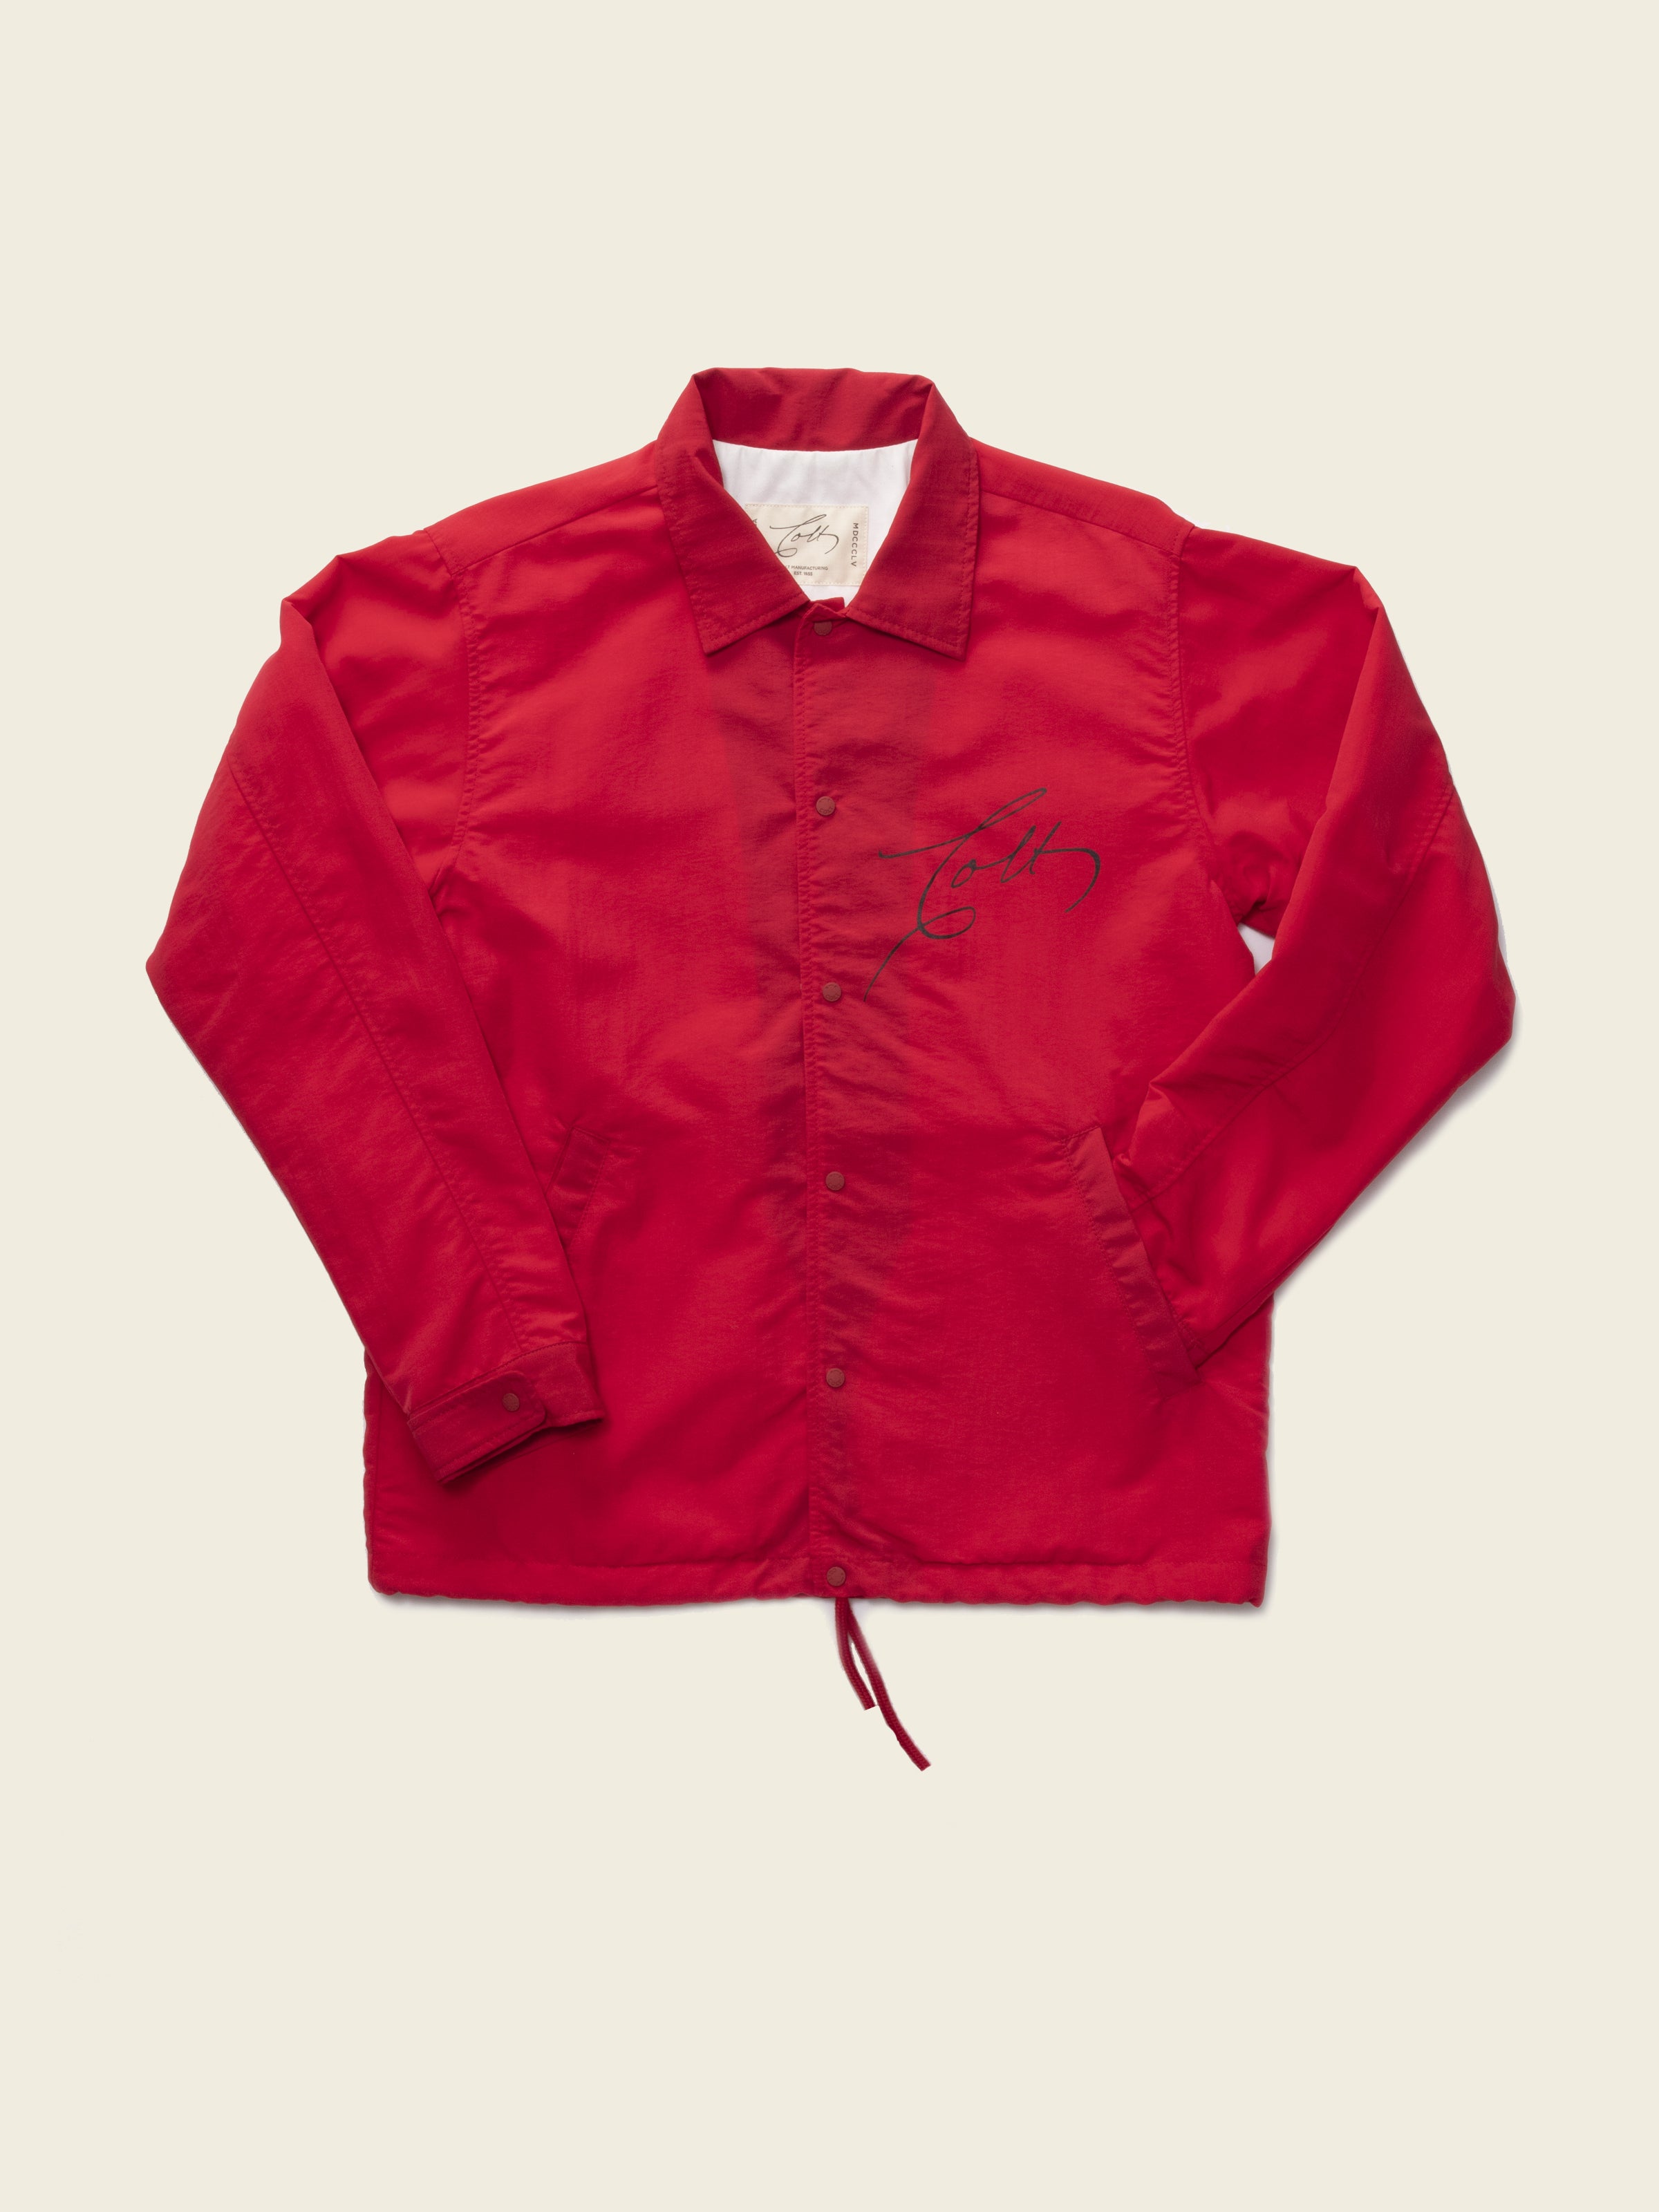 Signature Coaches Jacket in Red